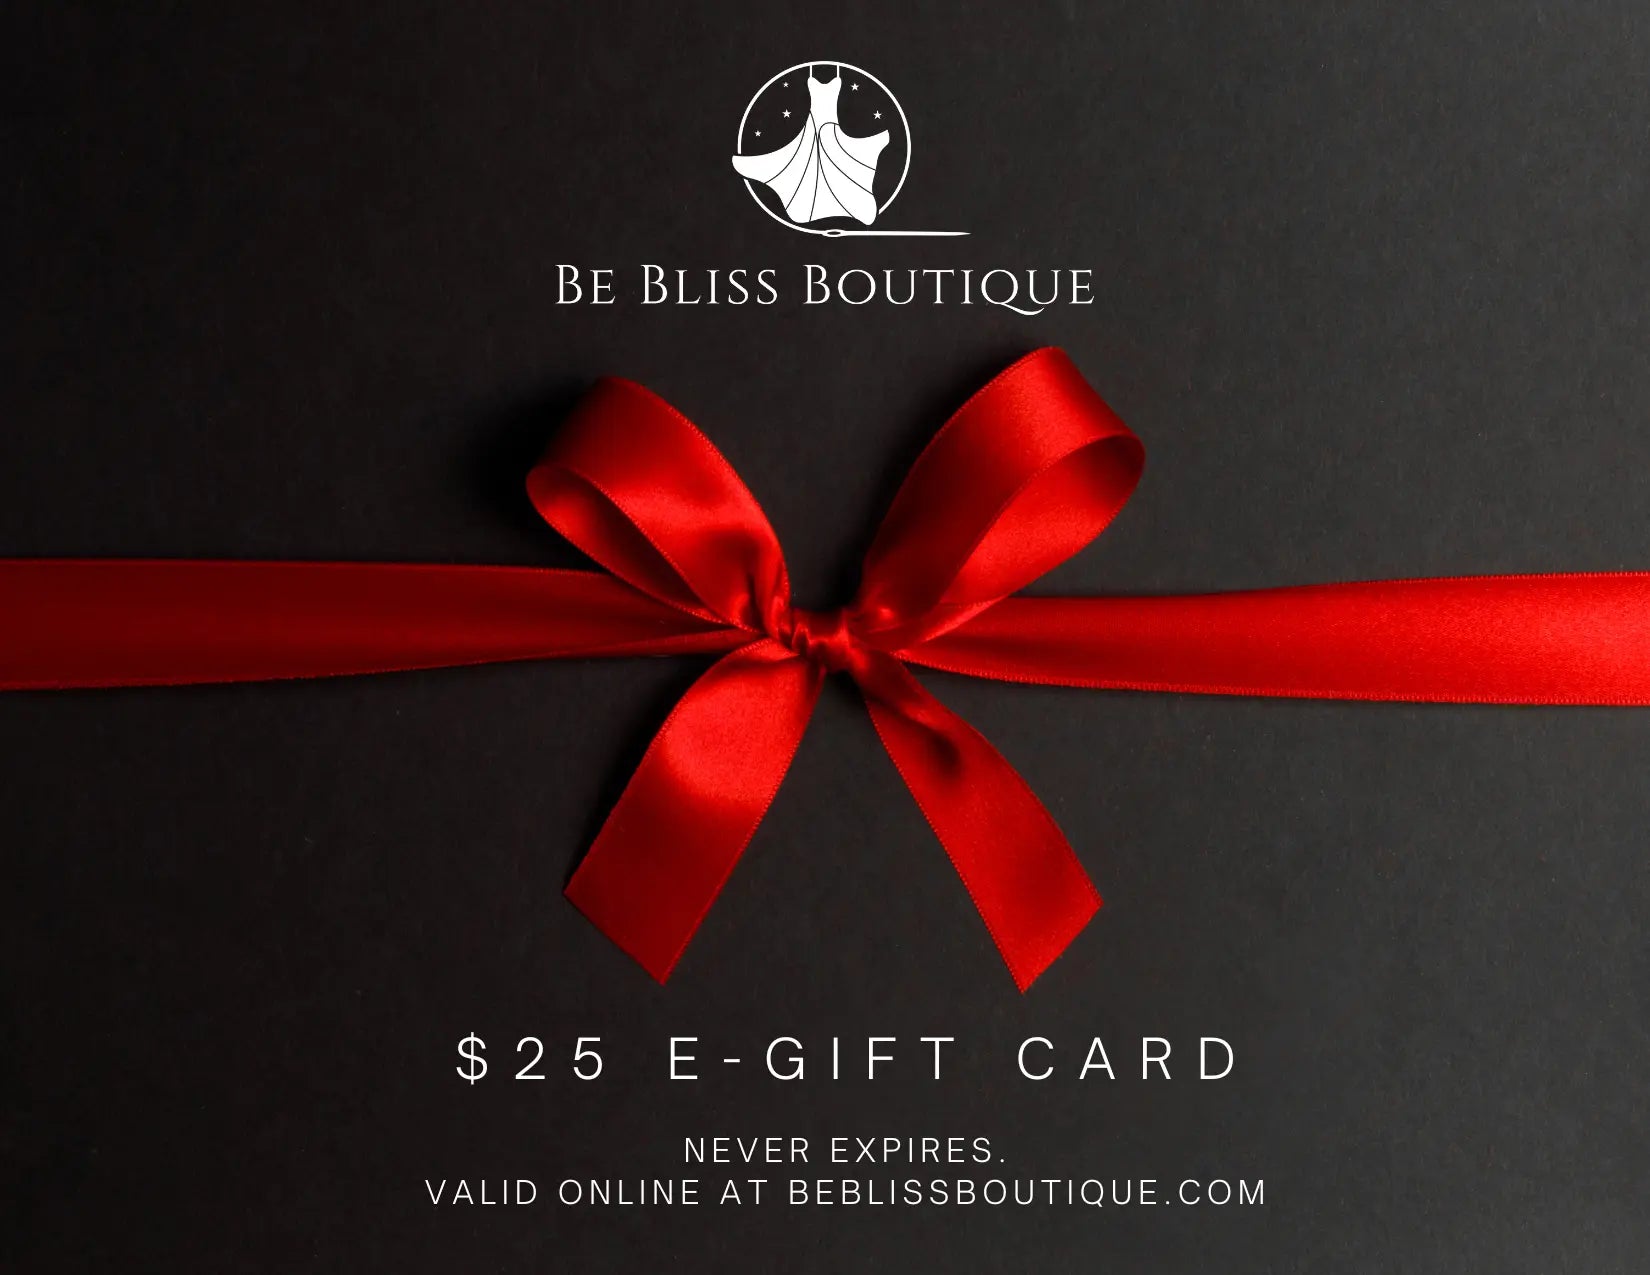 E-Gift Card for Be Bliss Boutique